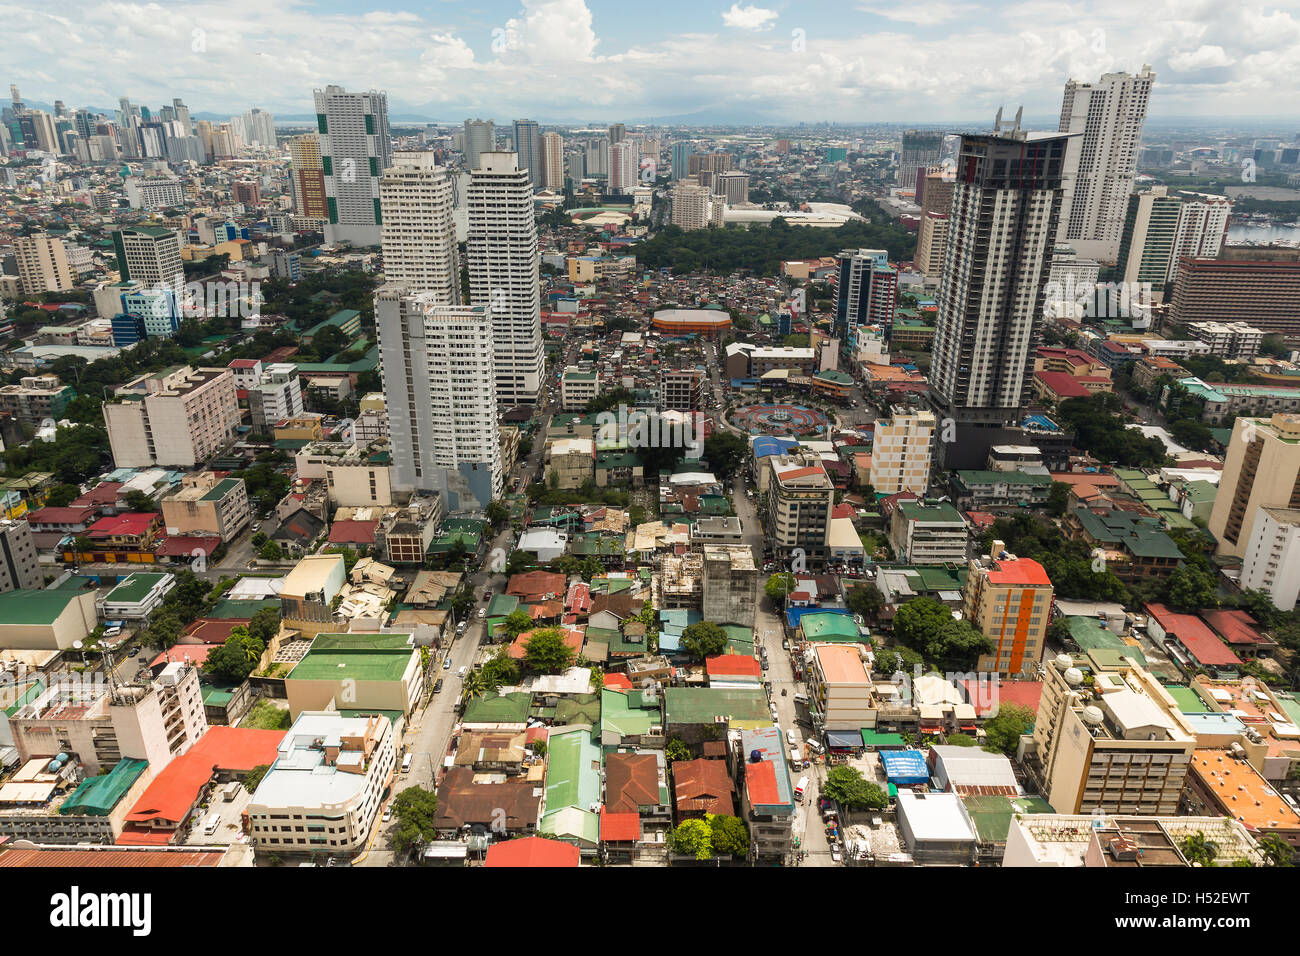 Manila, Philippines. September 2016. View of the neighborhood of Malate in the Philippines capital city. Stock Photo